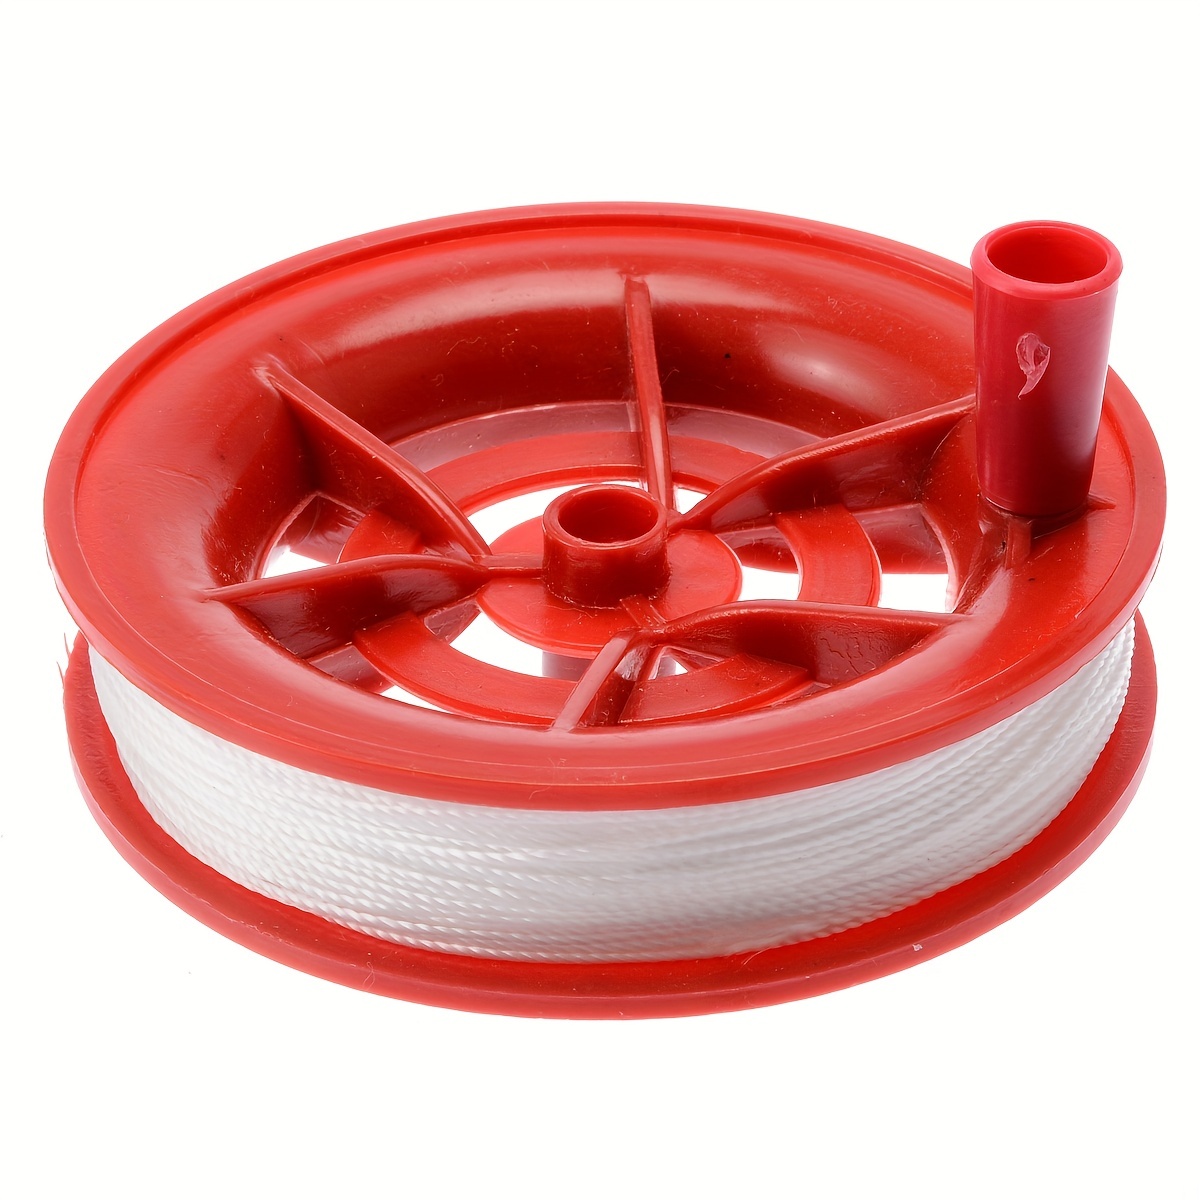 3937.01inch Flying Kite White Line String With Plastic Reel Handle Winder  Grip Wheel, 4pcs